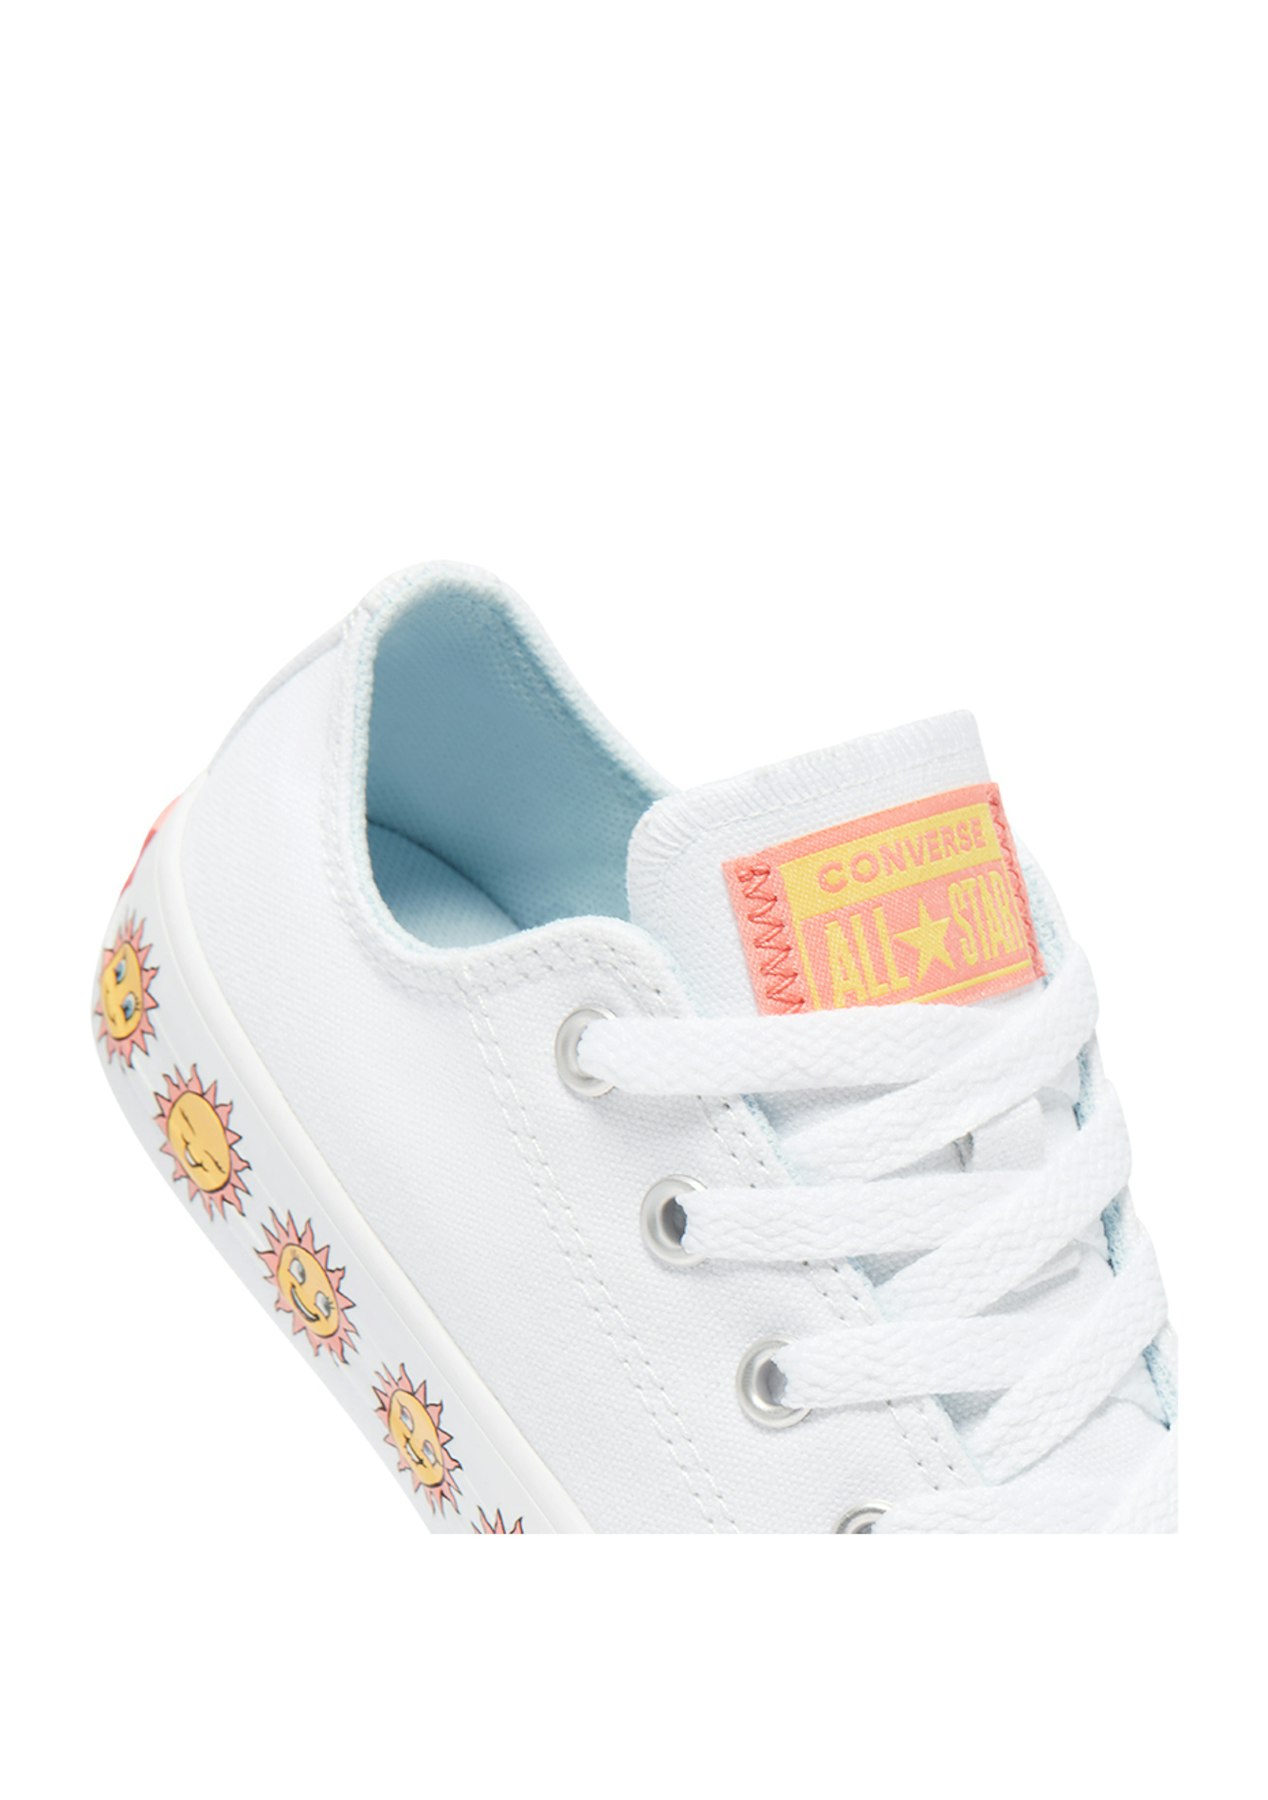 Converse Kids - Chuck Taylor All Star Sunny Side - White/Chambray Blue/Pink  Gaze - Onceit